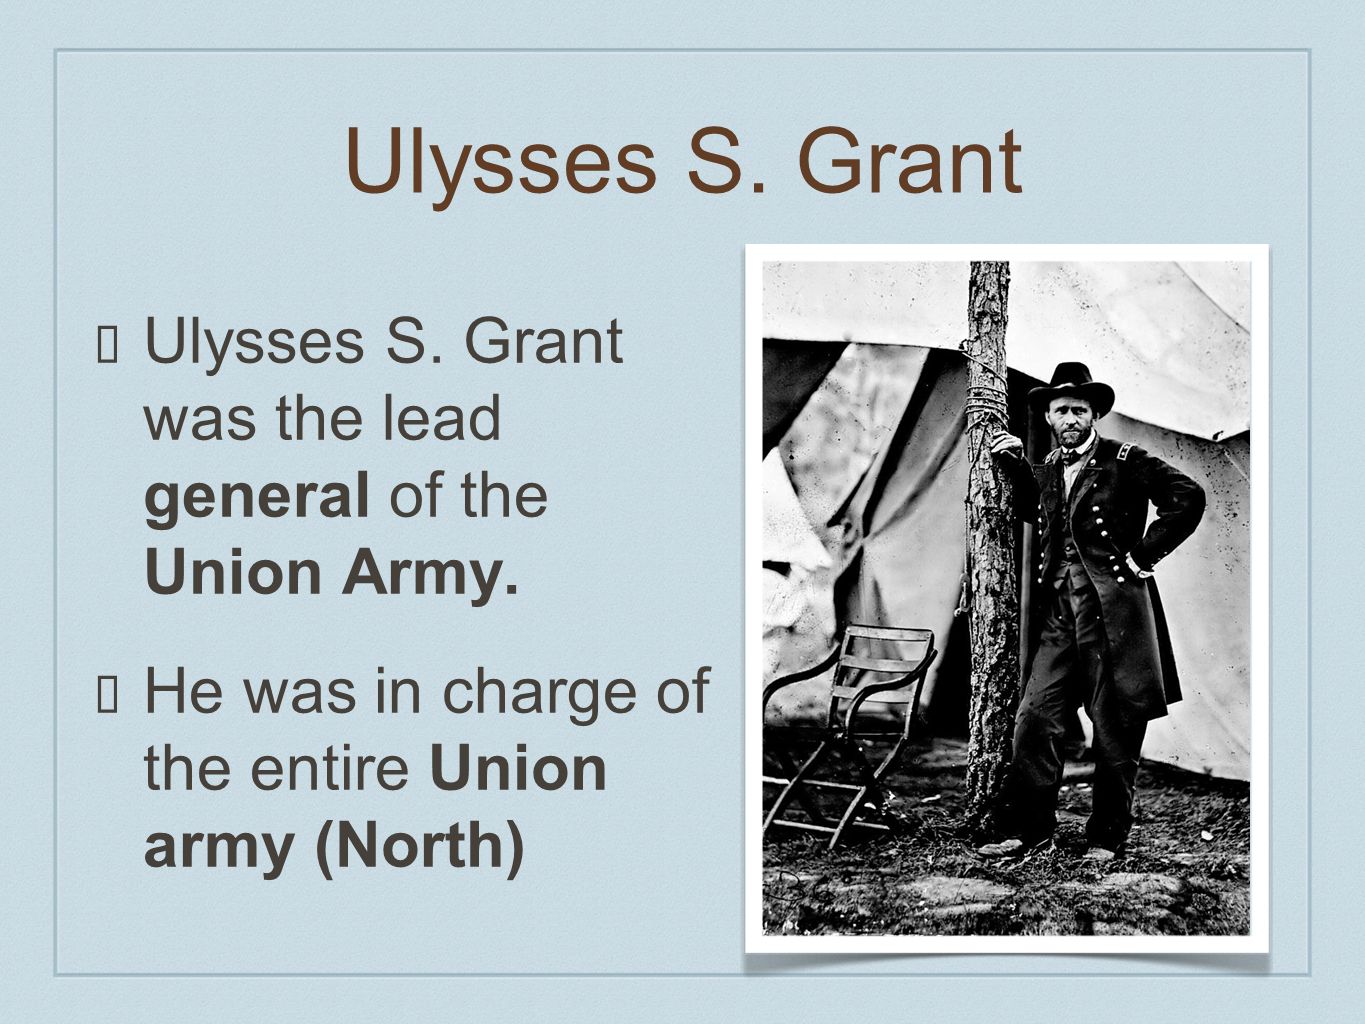 Ulysses S. Grant Ulysses S. Grant was the lead general of the Union Army.